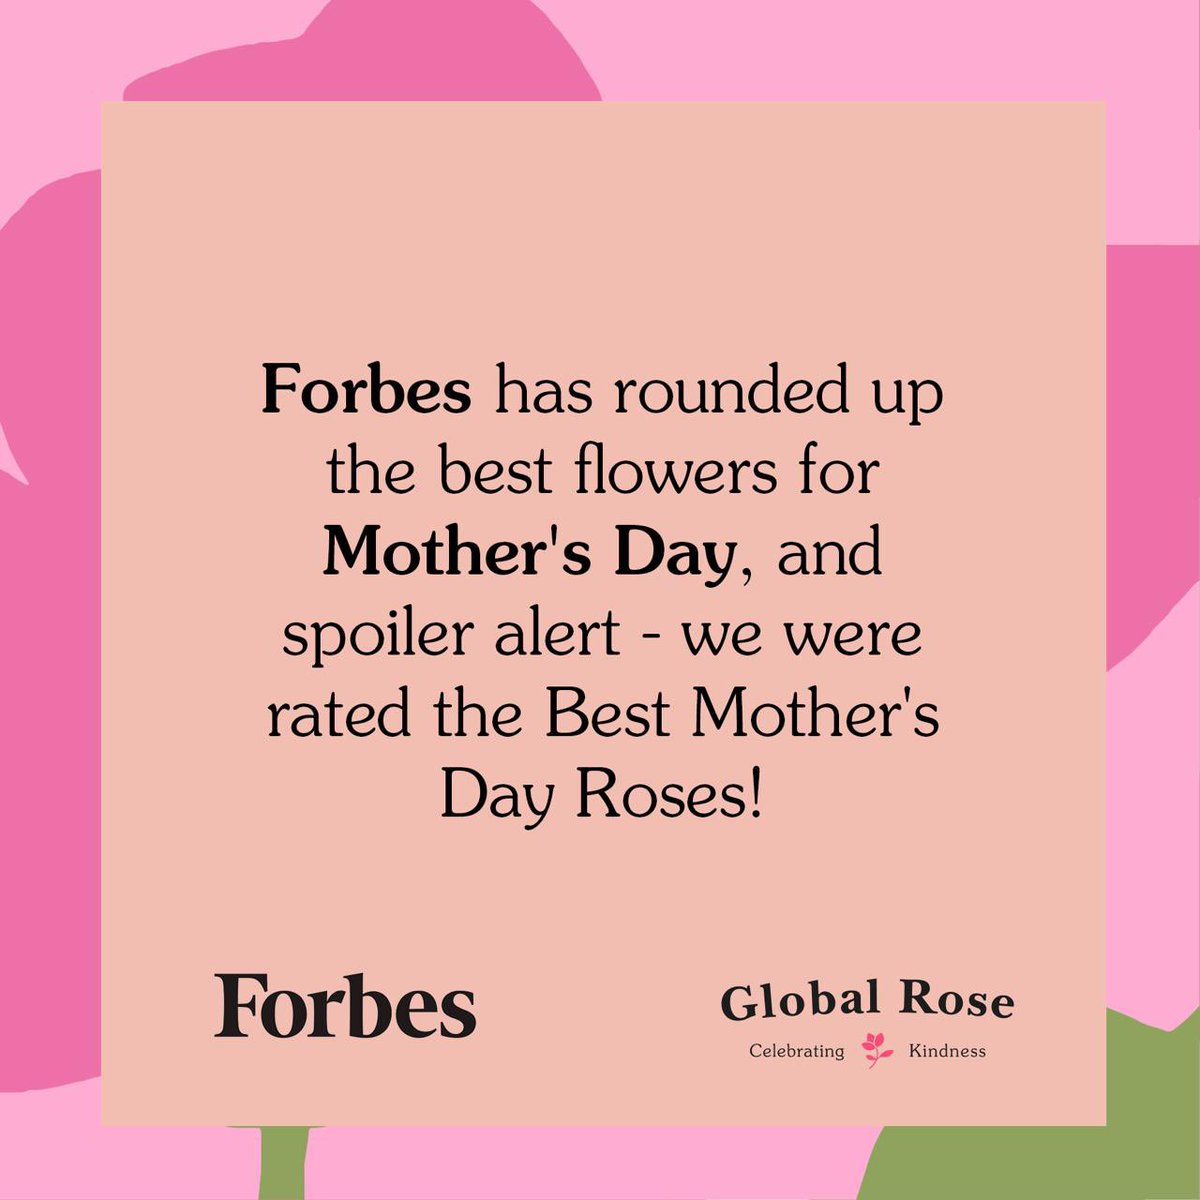 Forbes has rounded up the best flowers for Mother’s Day , and spoiler alert - we were rated the Best Mother’s Day Roses! 💐 • #globalrose #flowerdelivery